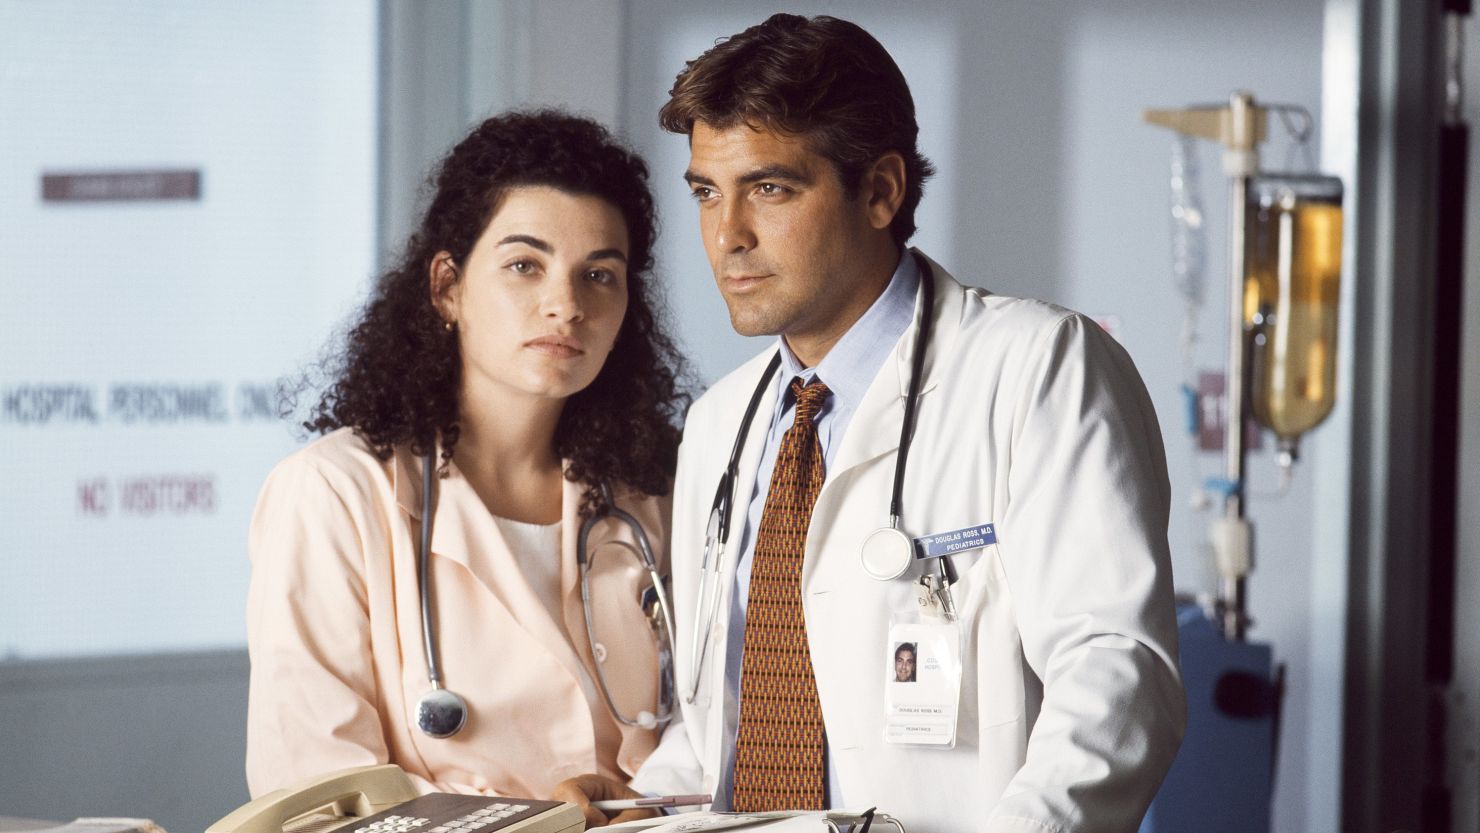 Julianna Margulies as nurse Carol Hathaway, George Clooney as Dr. Doug Ross in "ER."  -- Photo by: NBCU Photo Bank